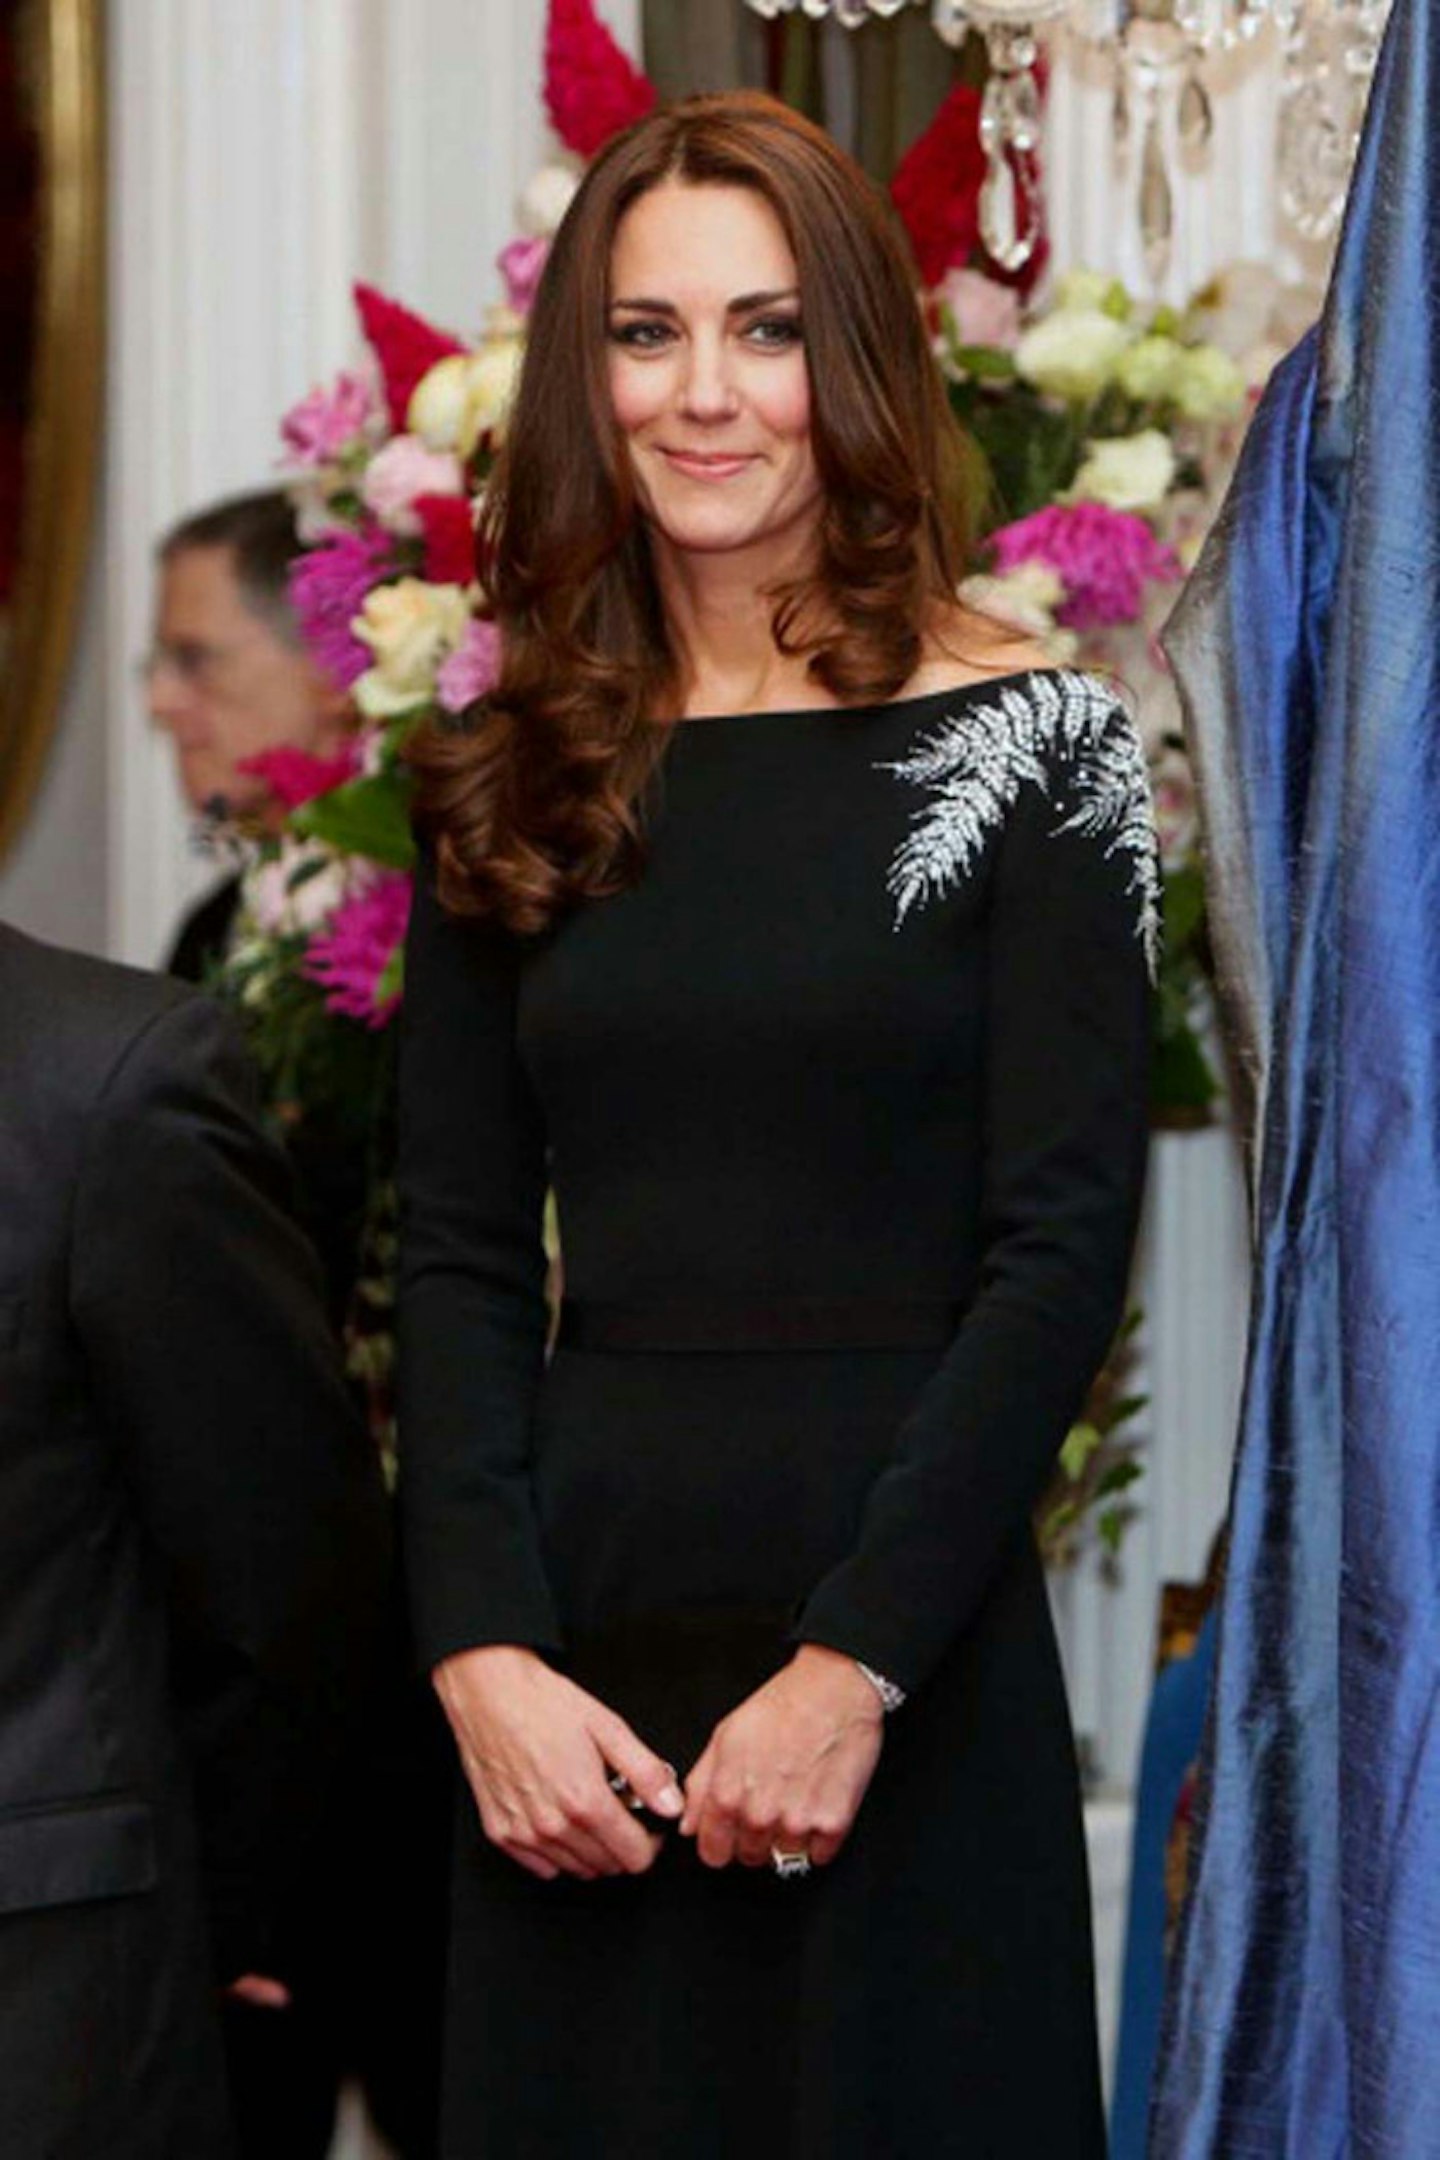 The Duchess of Cambridge wears Jenny Packham at State Dinner, New Zealand, 10 April 2014